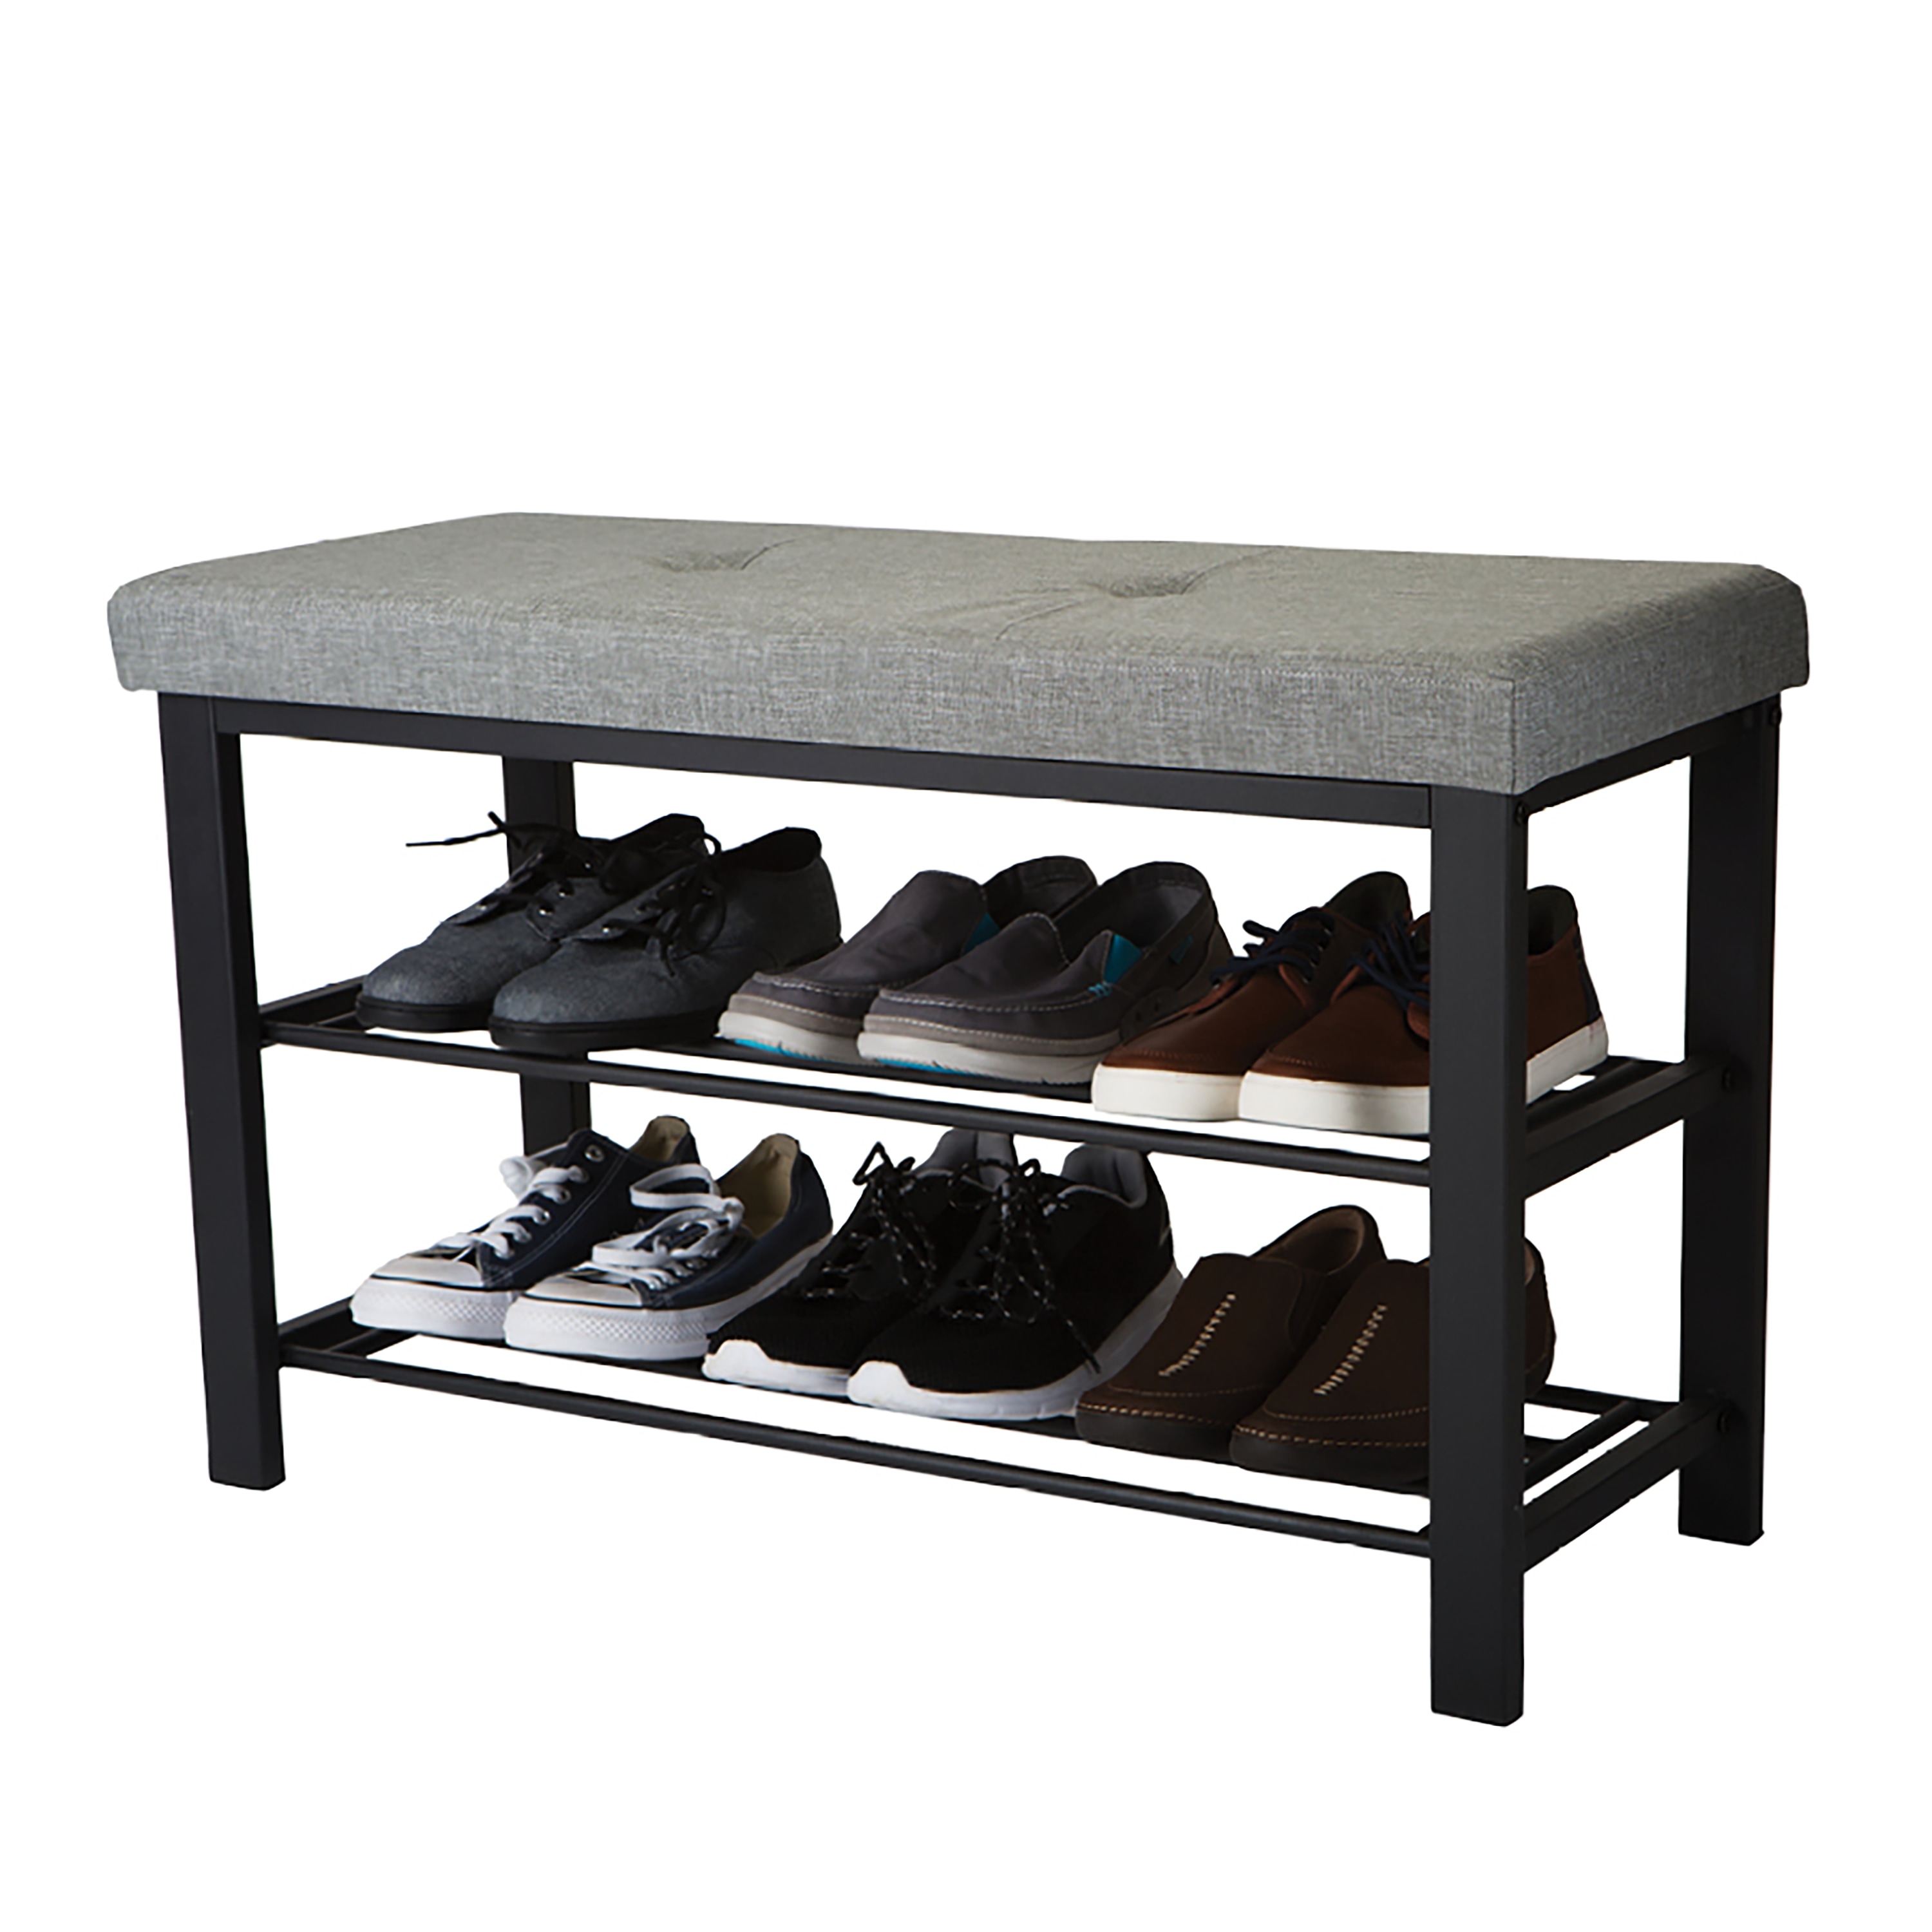 LGHM Entryway Bench, 3-Tier Shoe Bench with Storage in Black, 1 unit -  Kroger